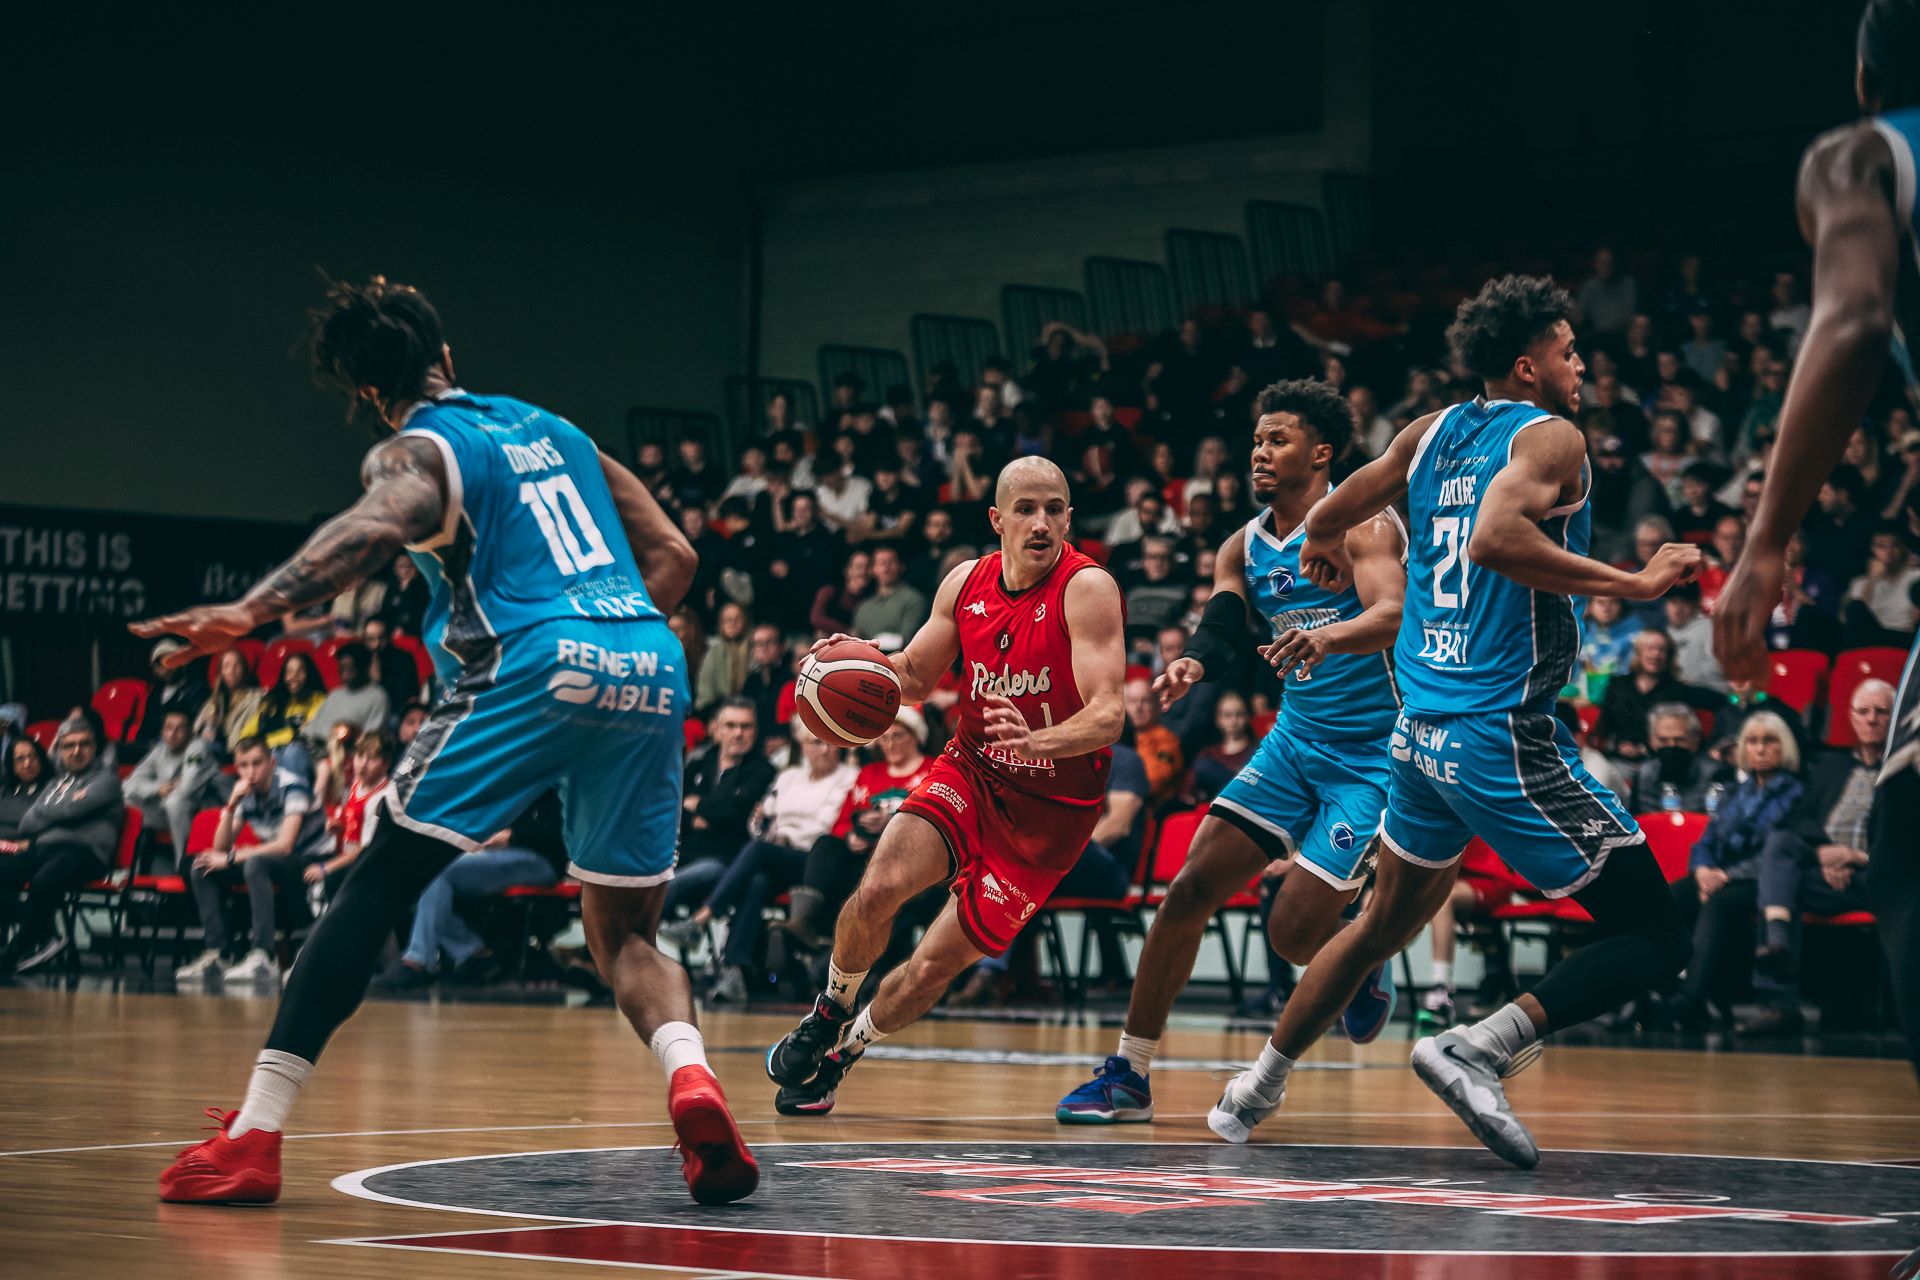 Trio of expansion teams accelerate CEBL's rise in Canadian sports landscape